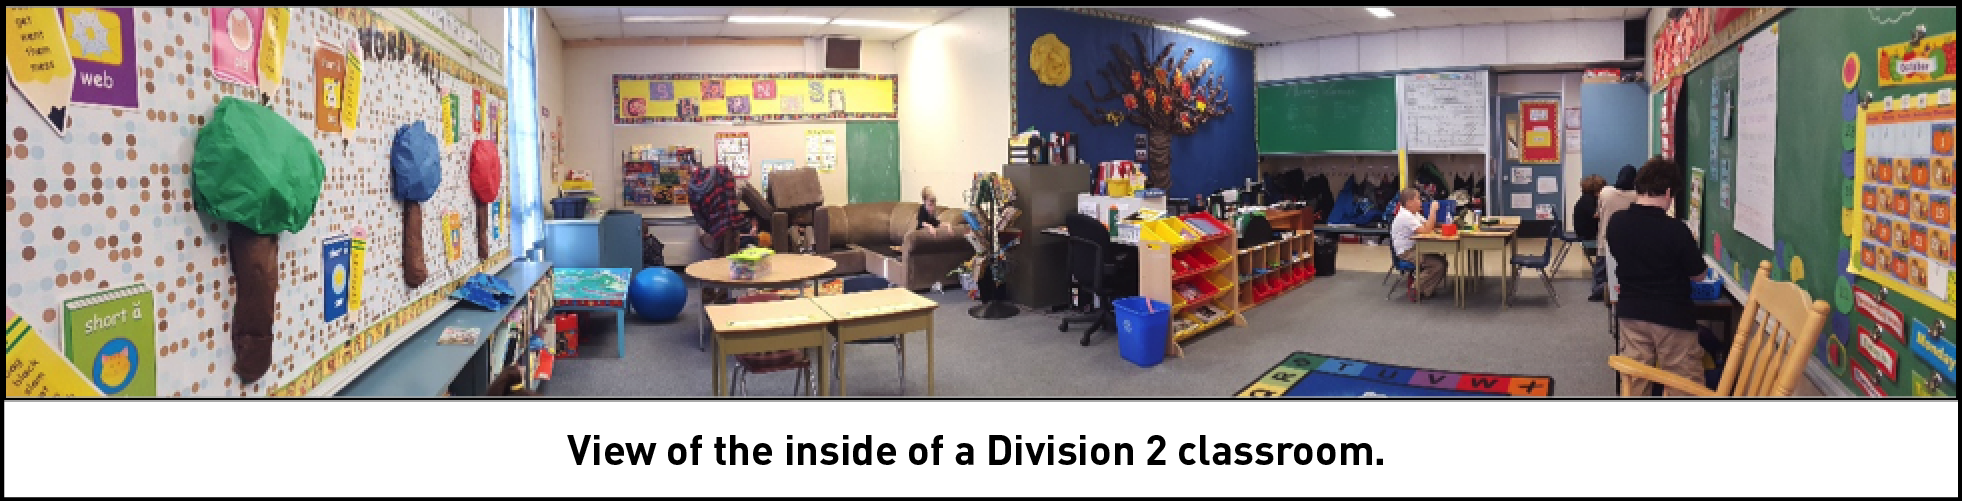 View of the inside of a Division 2 classroom